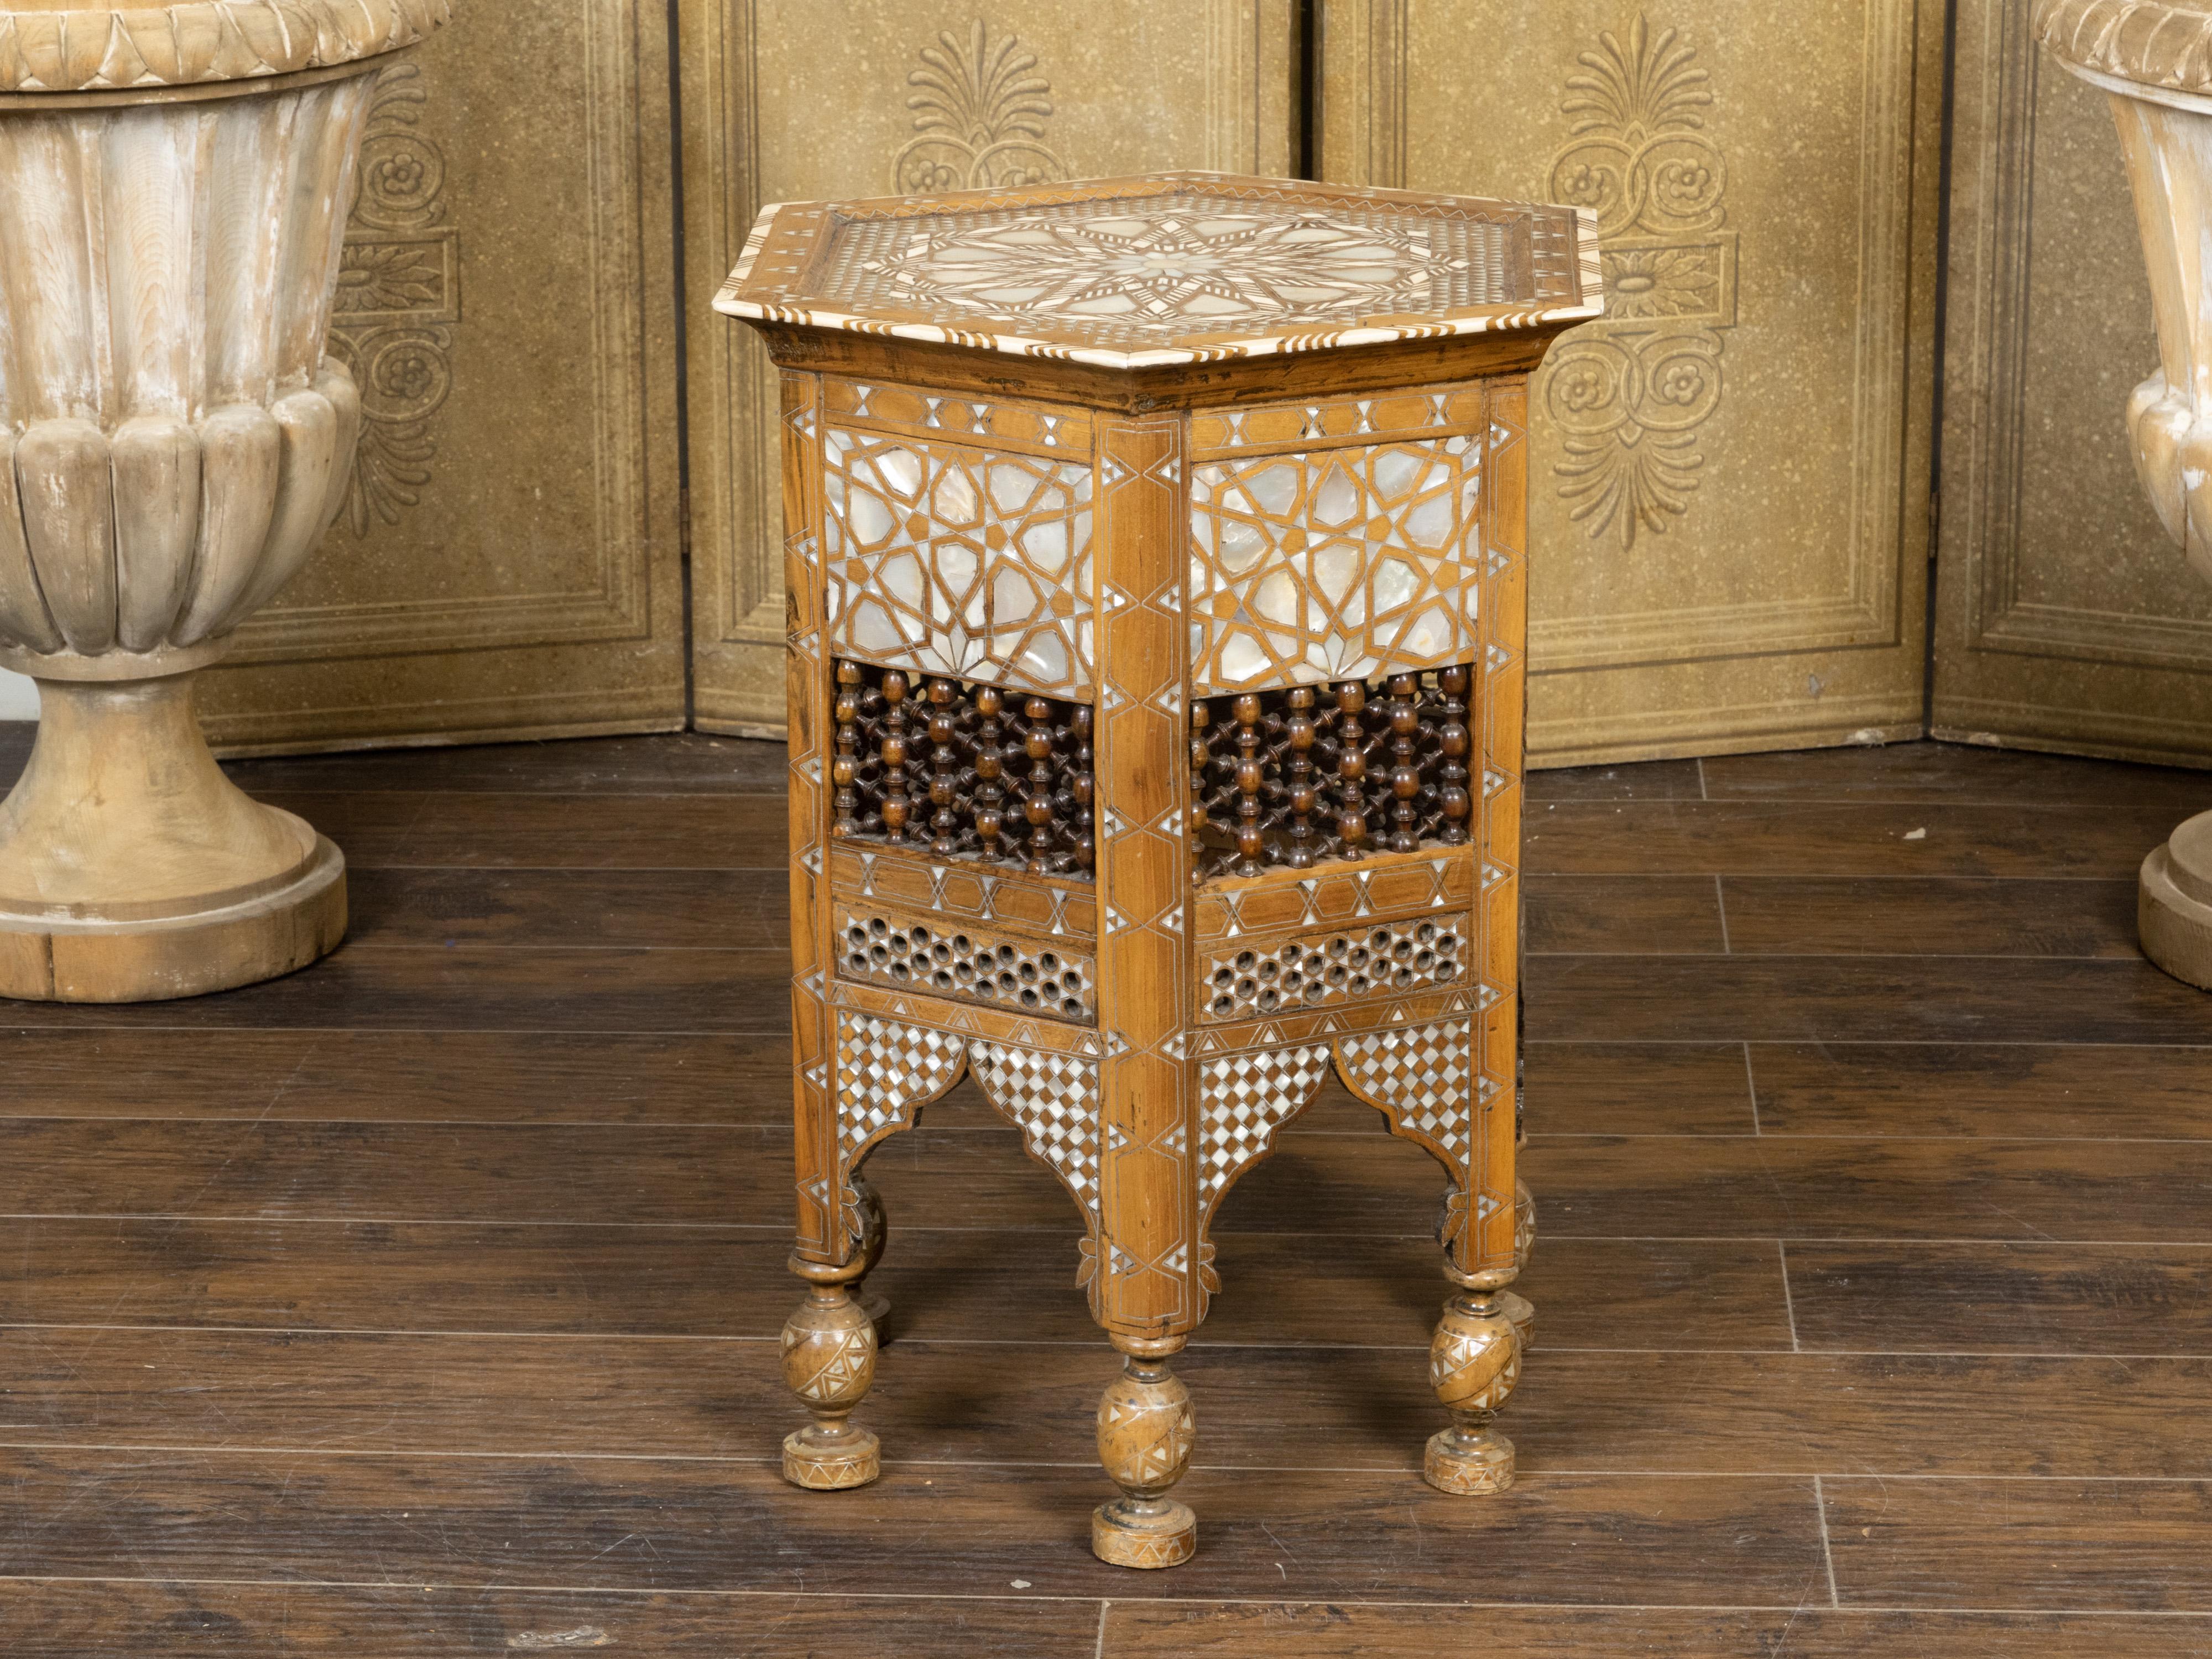 A Moroccan Moorish style drinks table from the early 20th century, with mother-of-pearl inlay, hexagonal top, geometric décor, turned balusters and carved pierced motifs. Created in Morocco during the first quarter of the 20th century, this petite